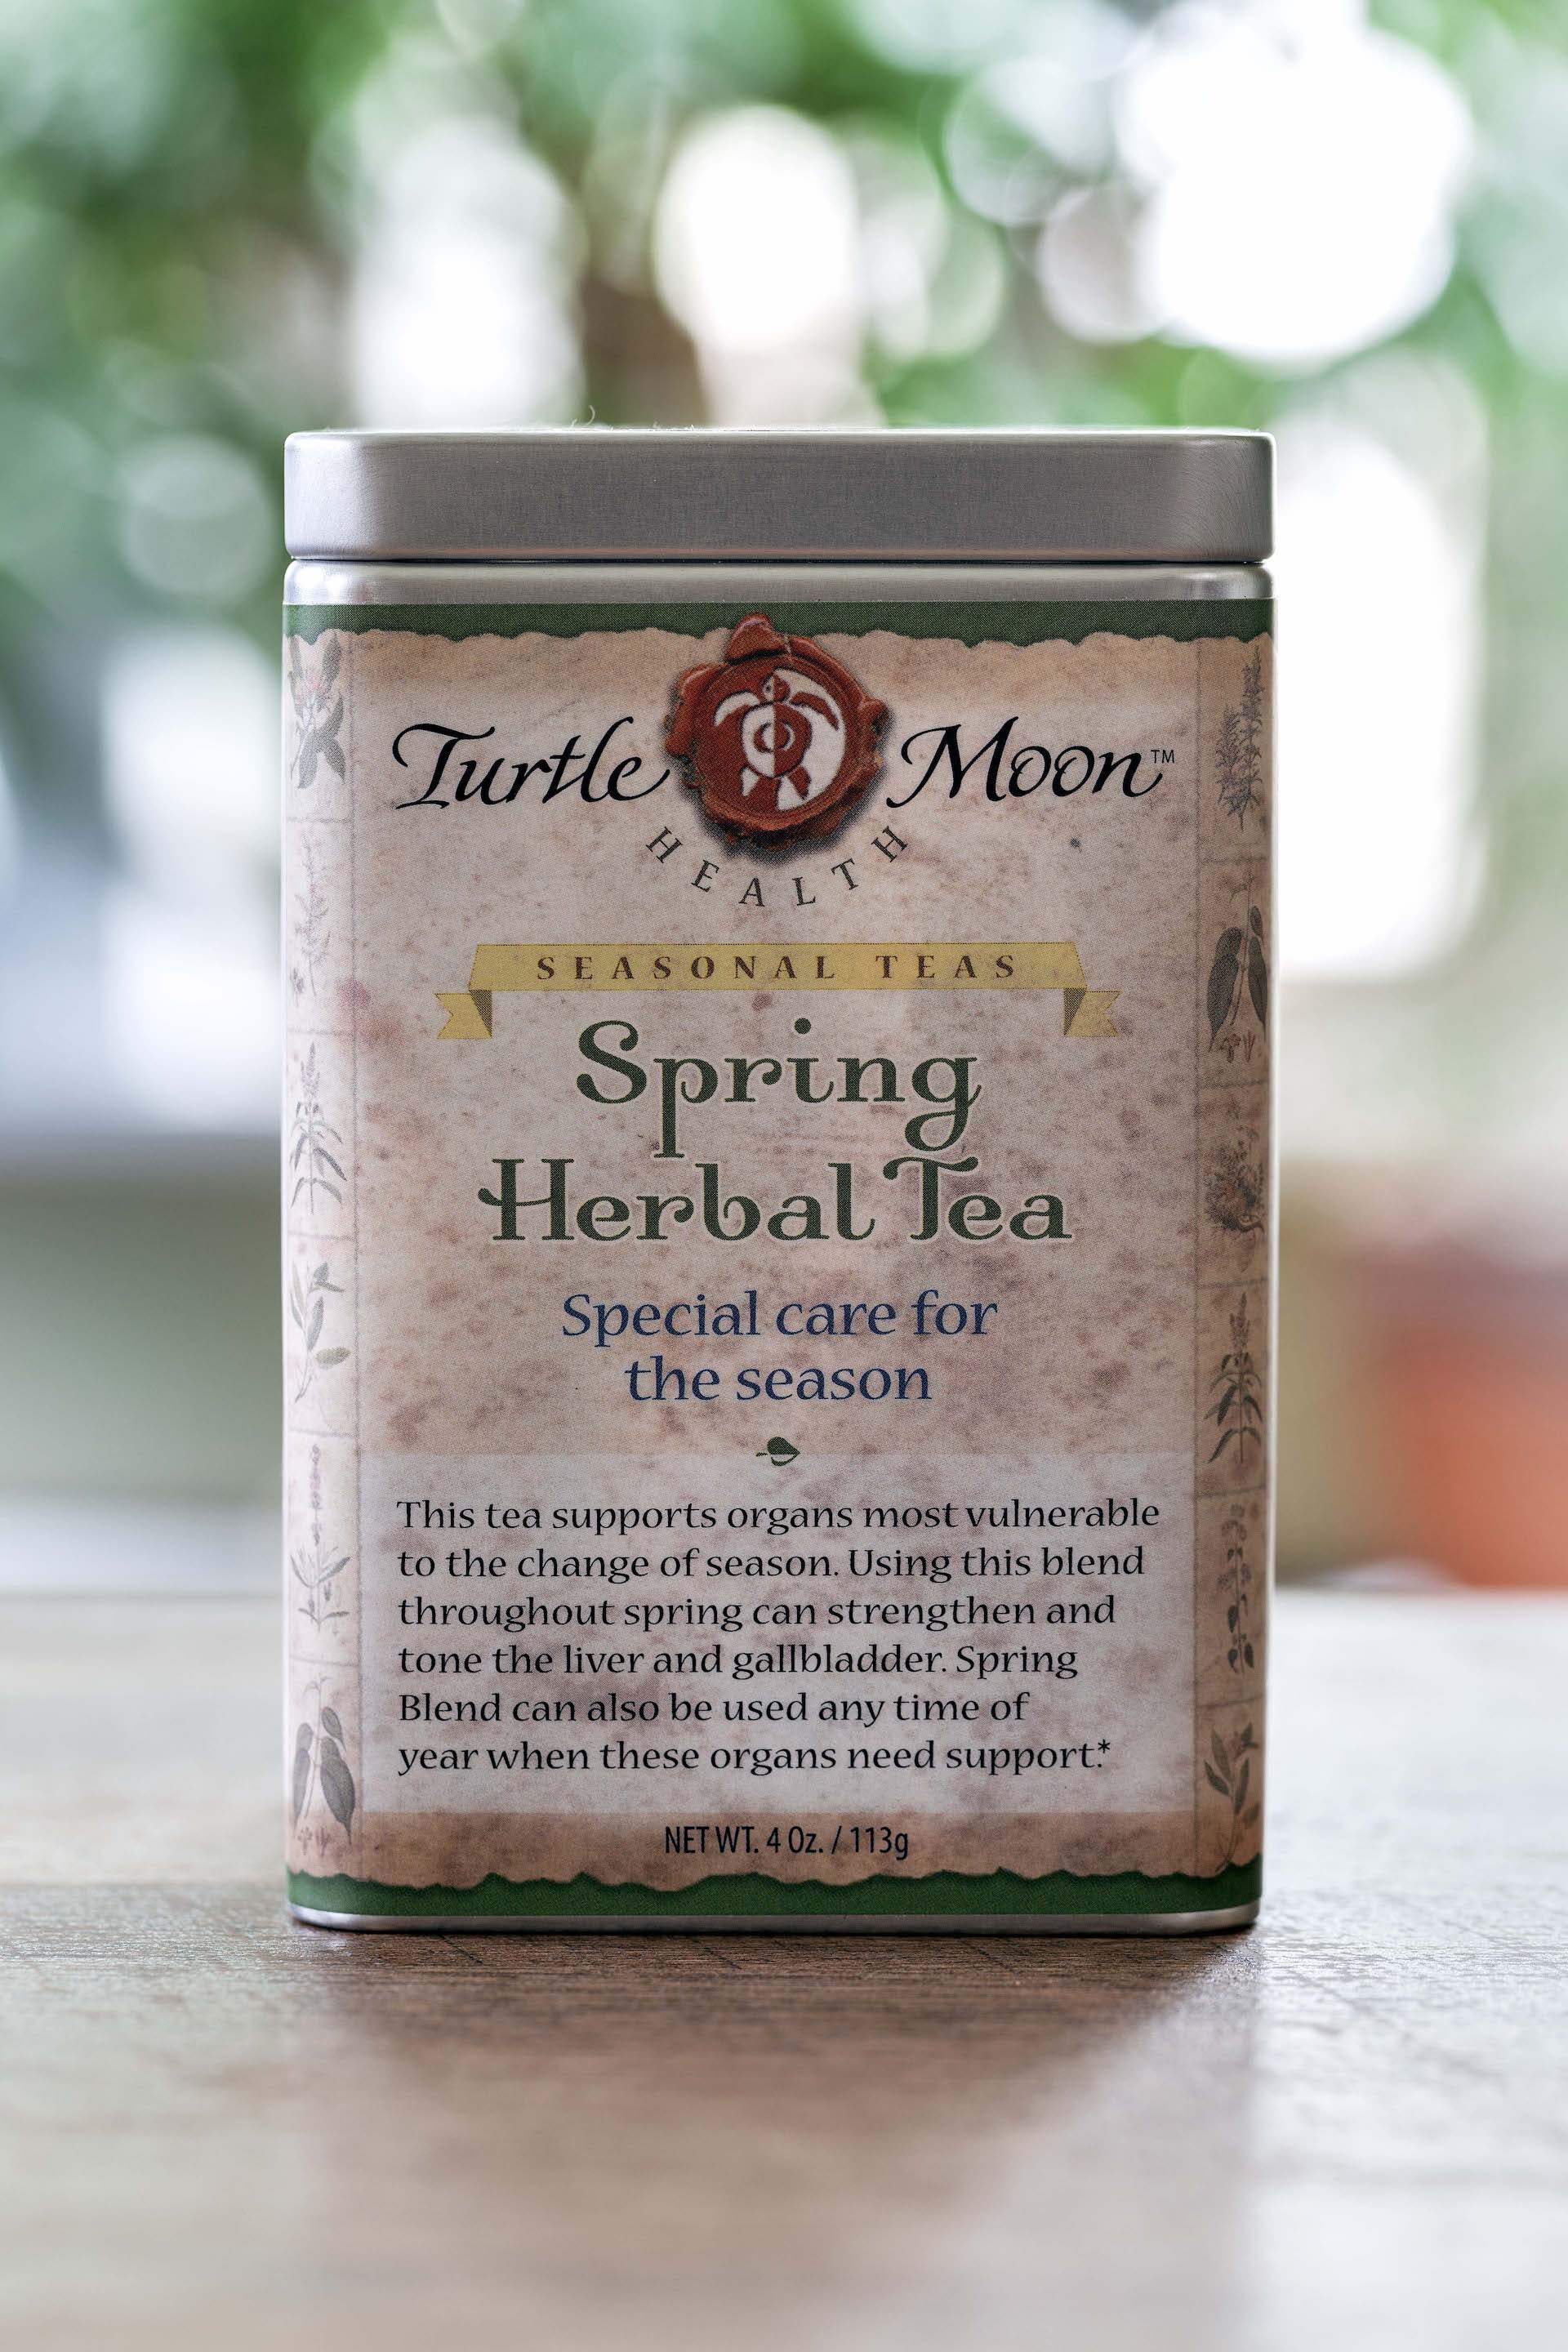 A Daily Cup of Herbal Tea for Health and Wellness